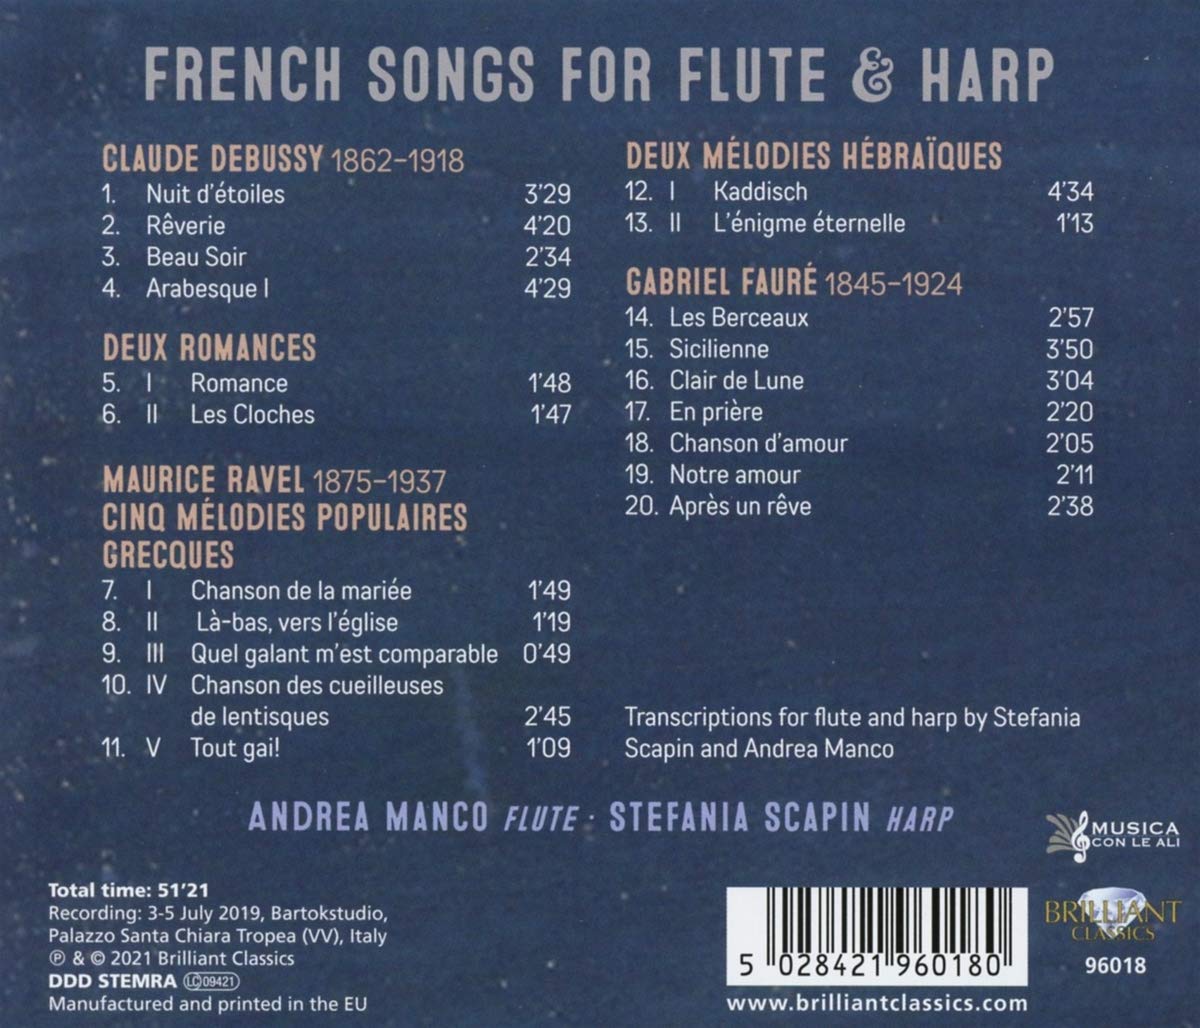 Andrea Manco 플루트와 하프로 연주한 프랑스 가곡 - 드뷔시 / 라벨 / 포레 (Debussy / Ravel / Faure: French Songs for Flute and Harp) 